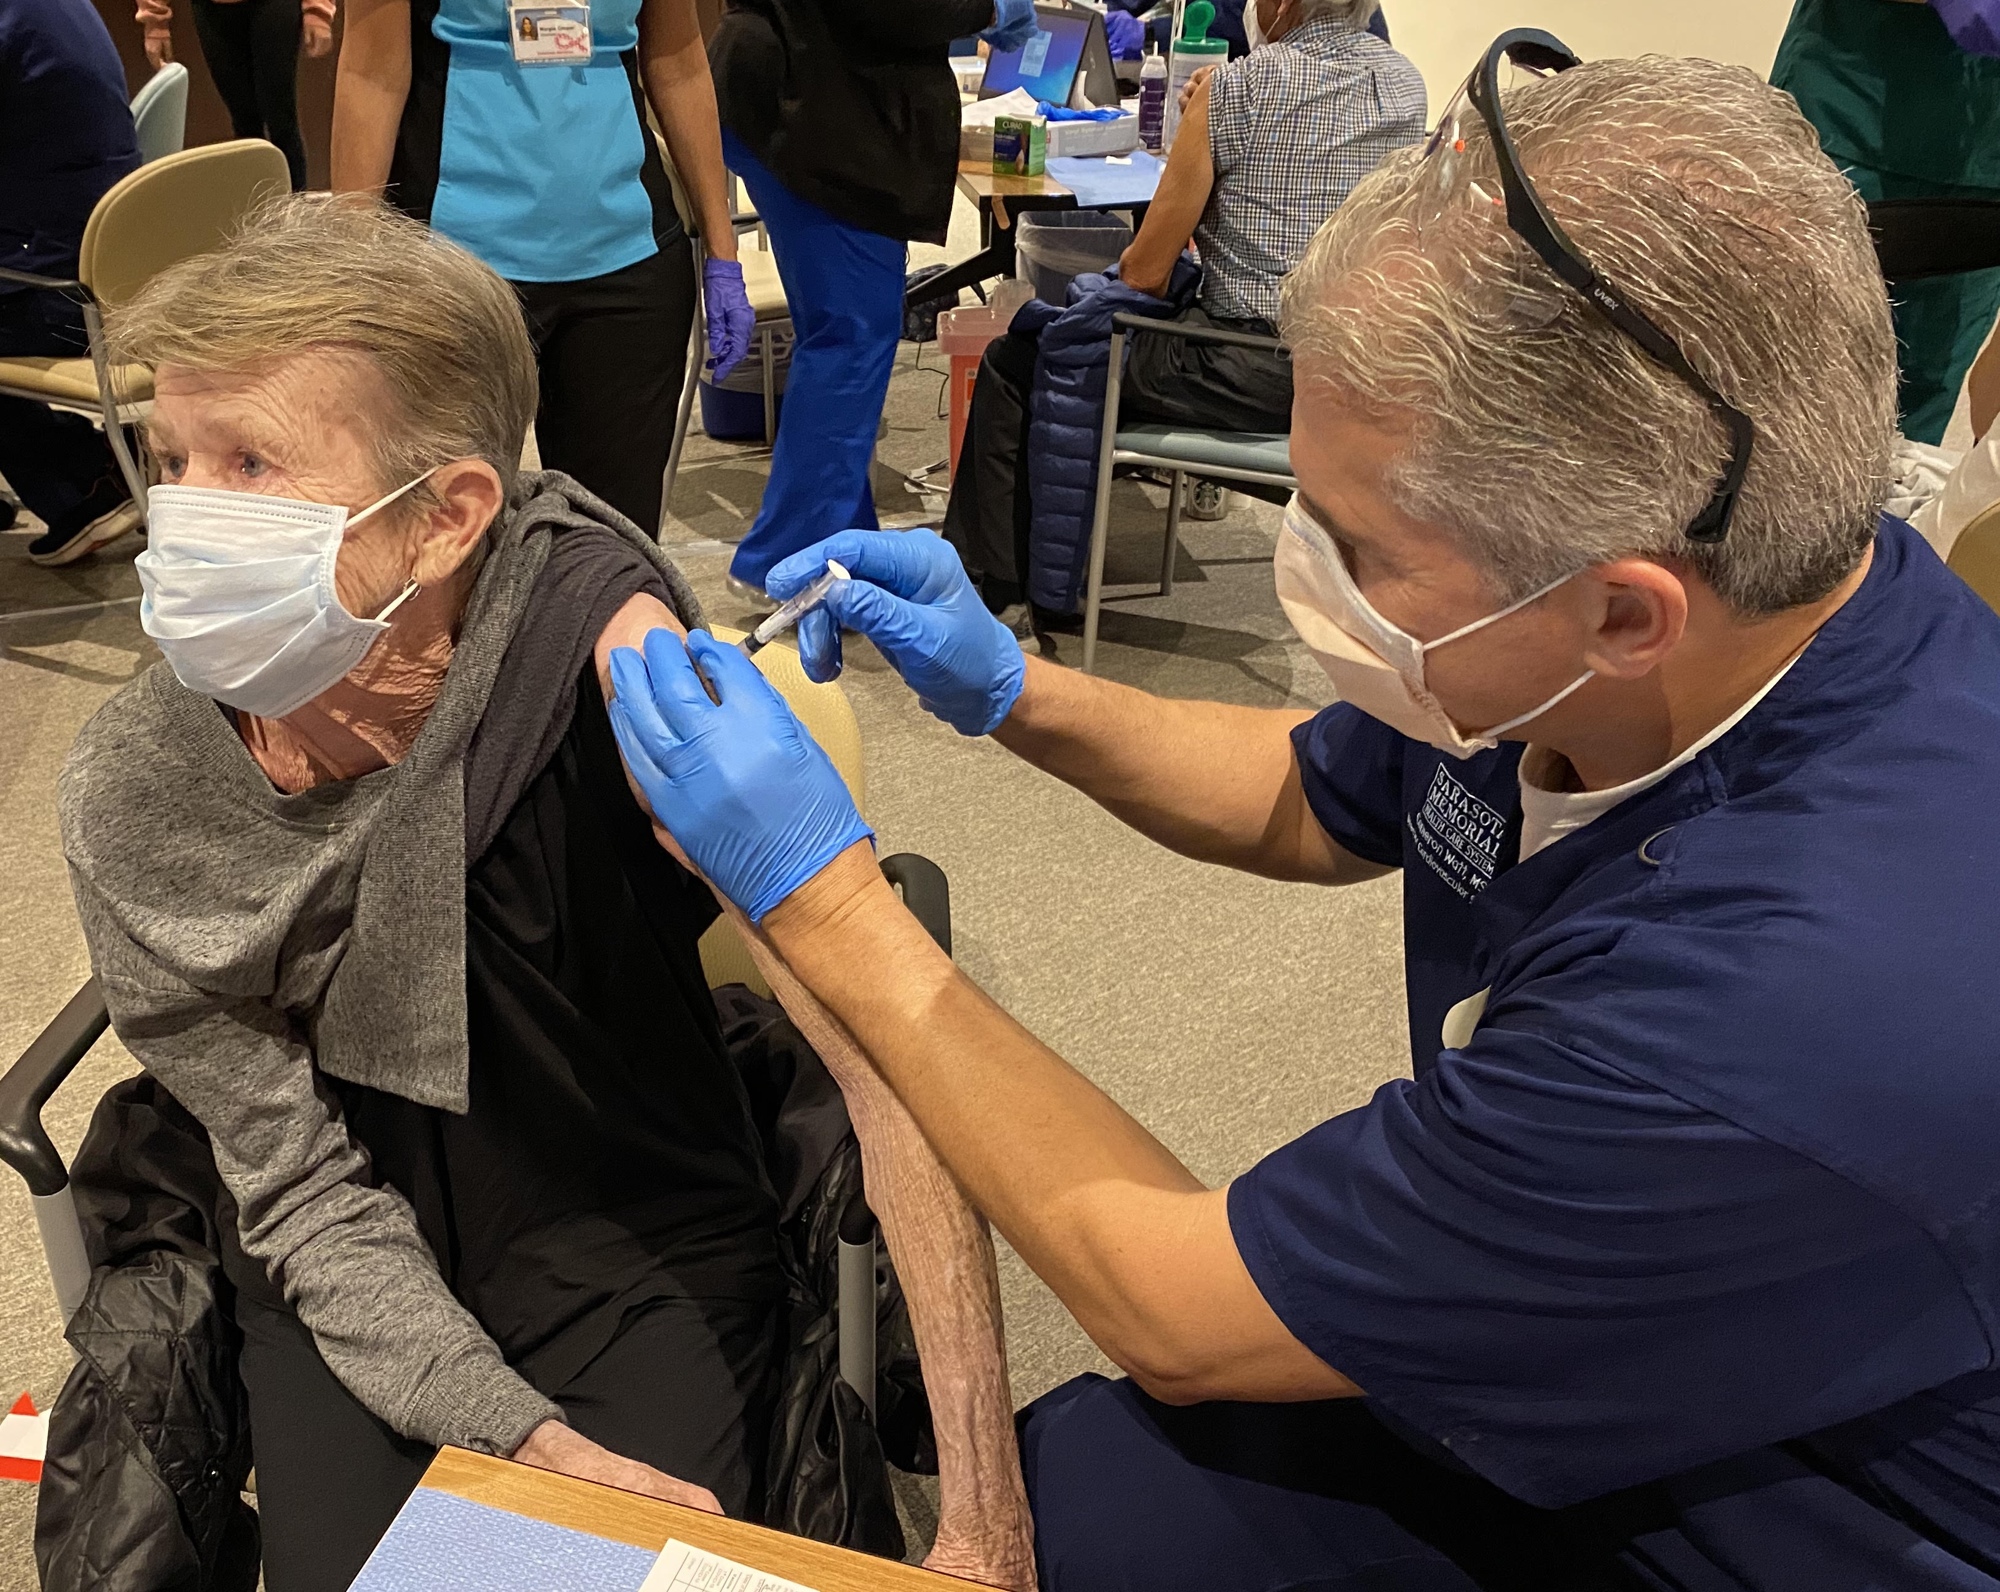 JANUARY: After the Florida Department of Health in Sarasota County depleted its supply of vaccines, Sarasota Memorial Hospital offered up doses this weekend to members of the public who were 65 or older. Courtesy image.